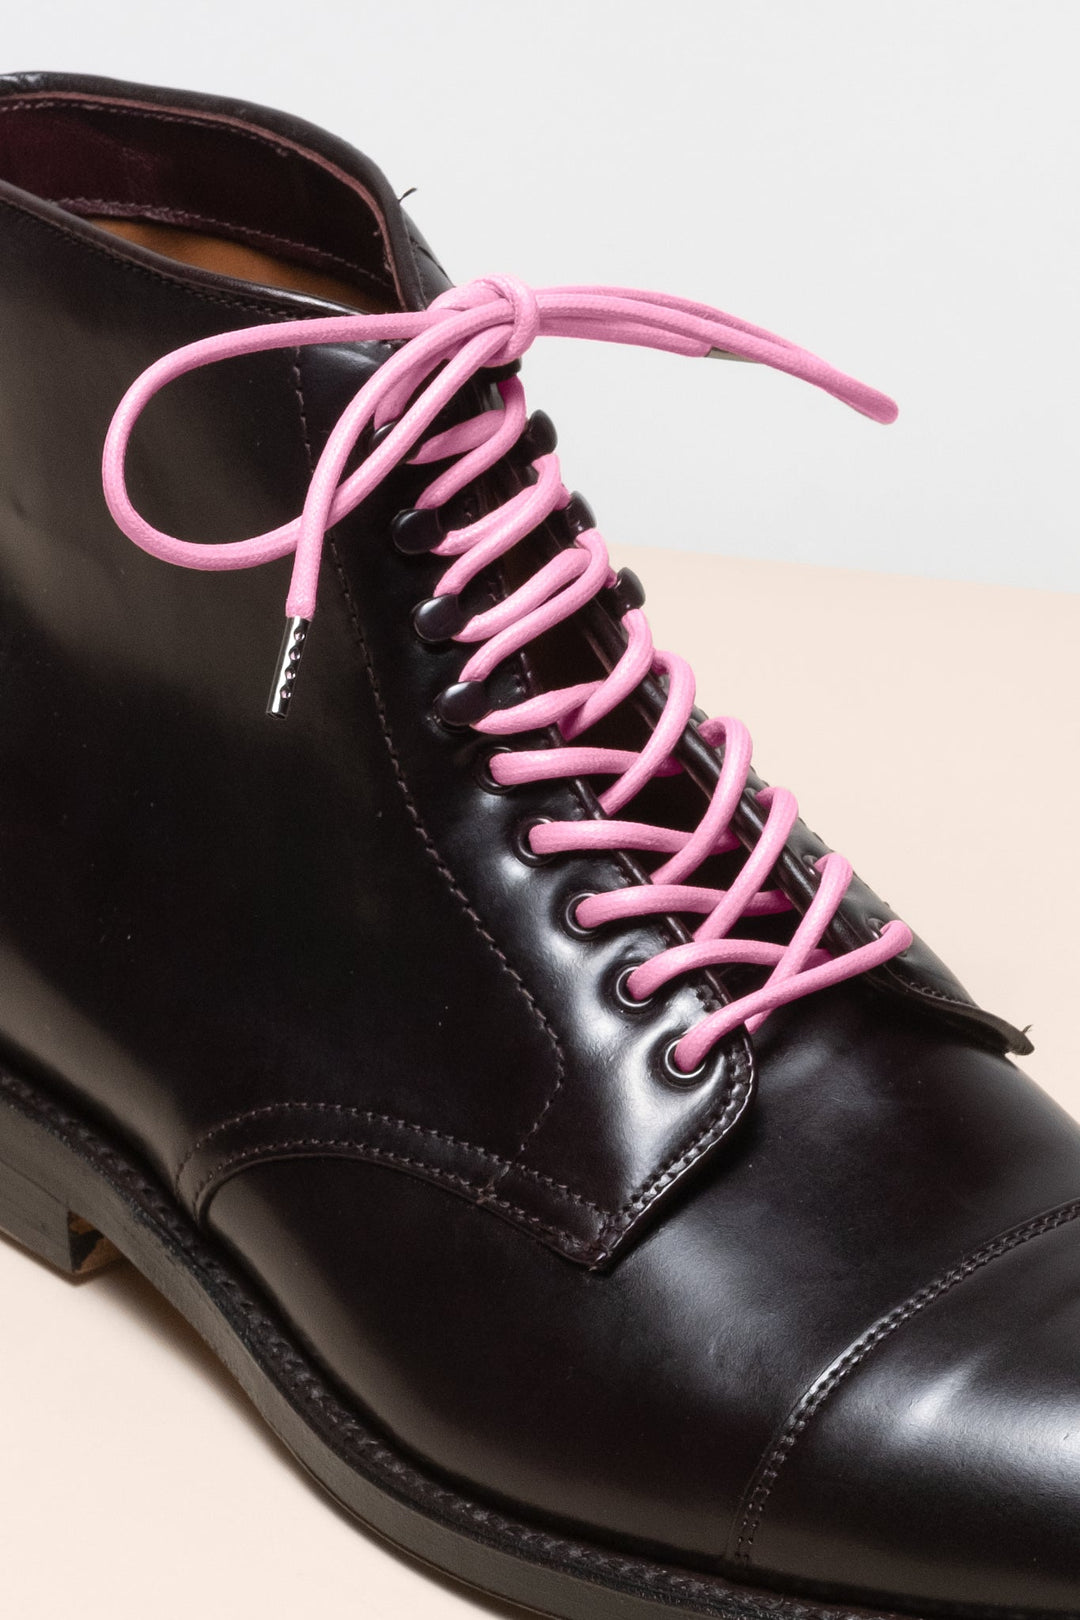 Flamingo Pink - 4mm round waxed shoelaces for boots and shoes made from 100% organic cotton - Senkels